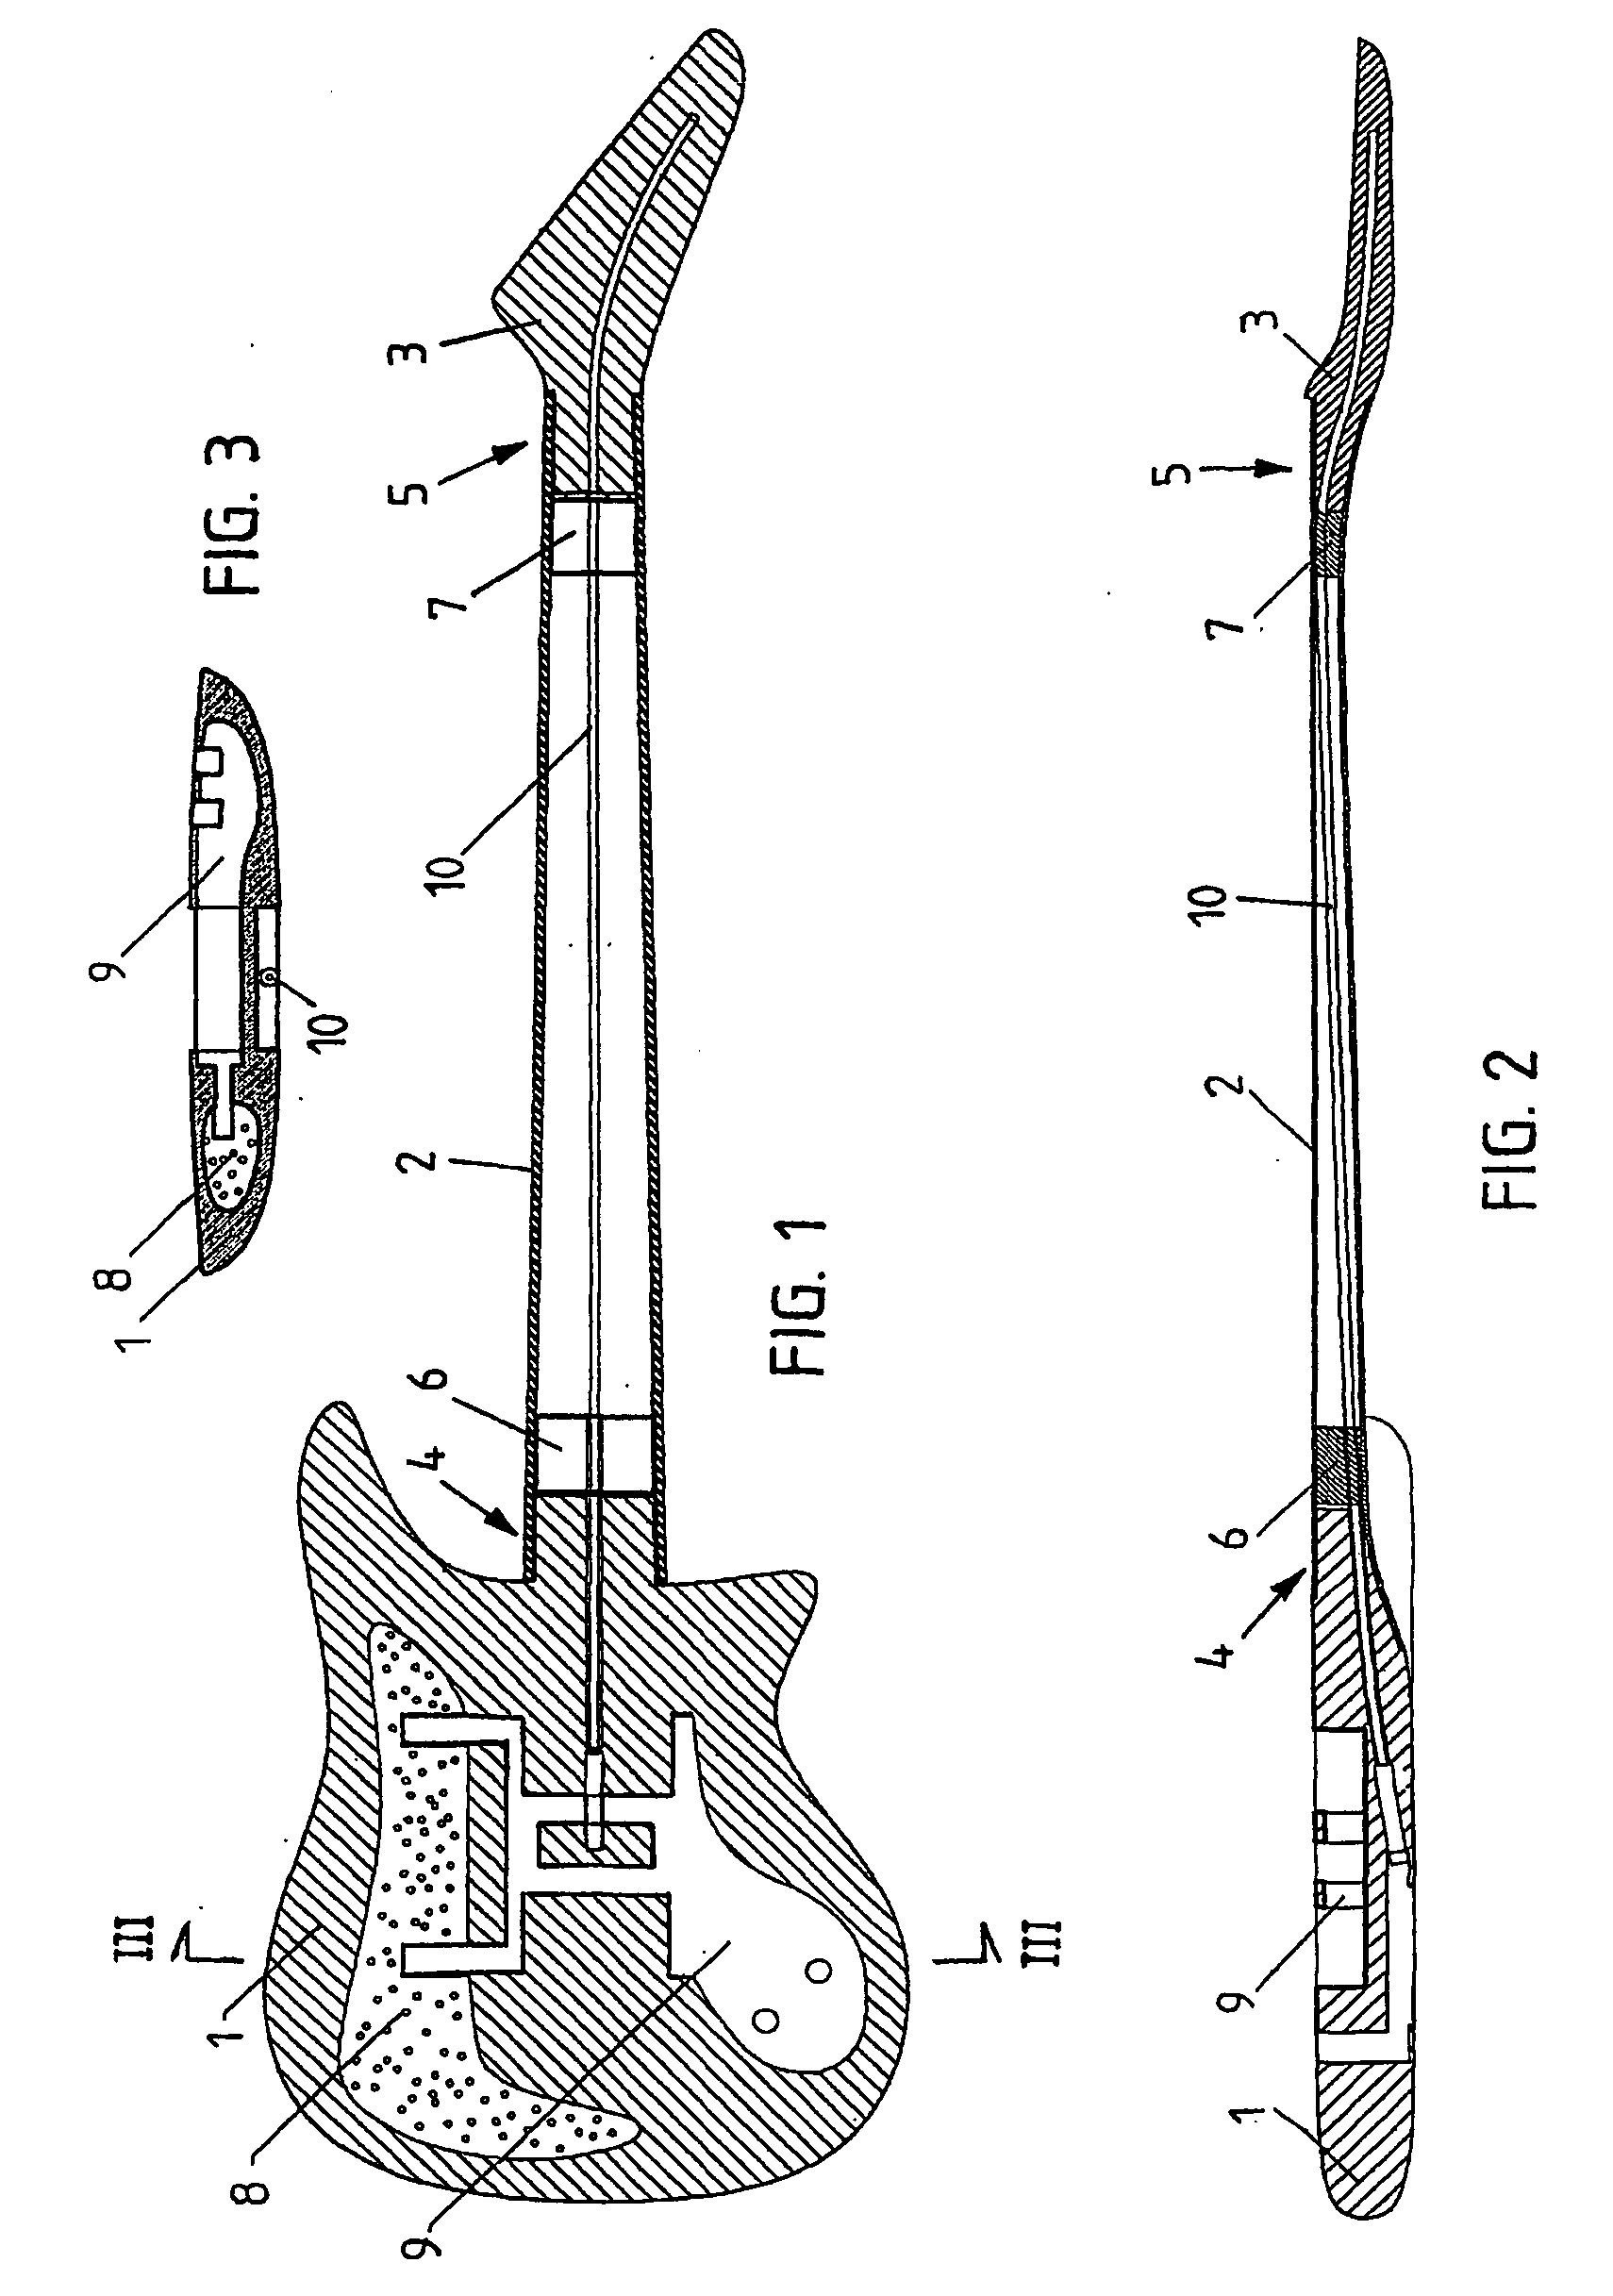 Structure for stringed instruments